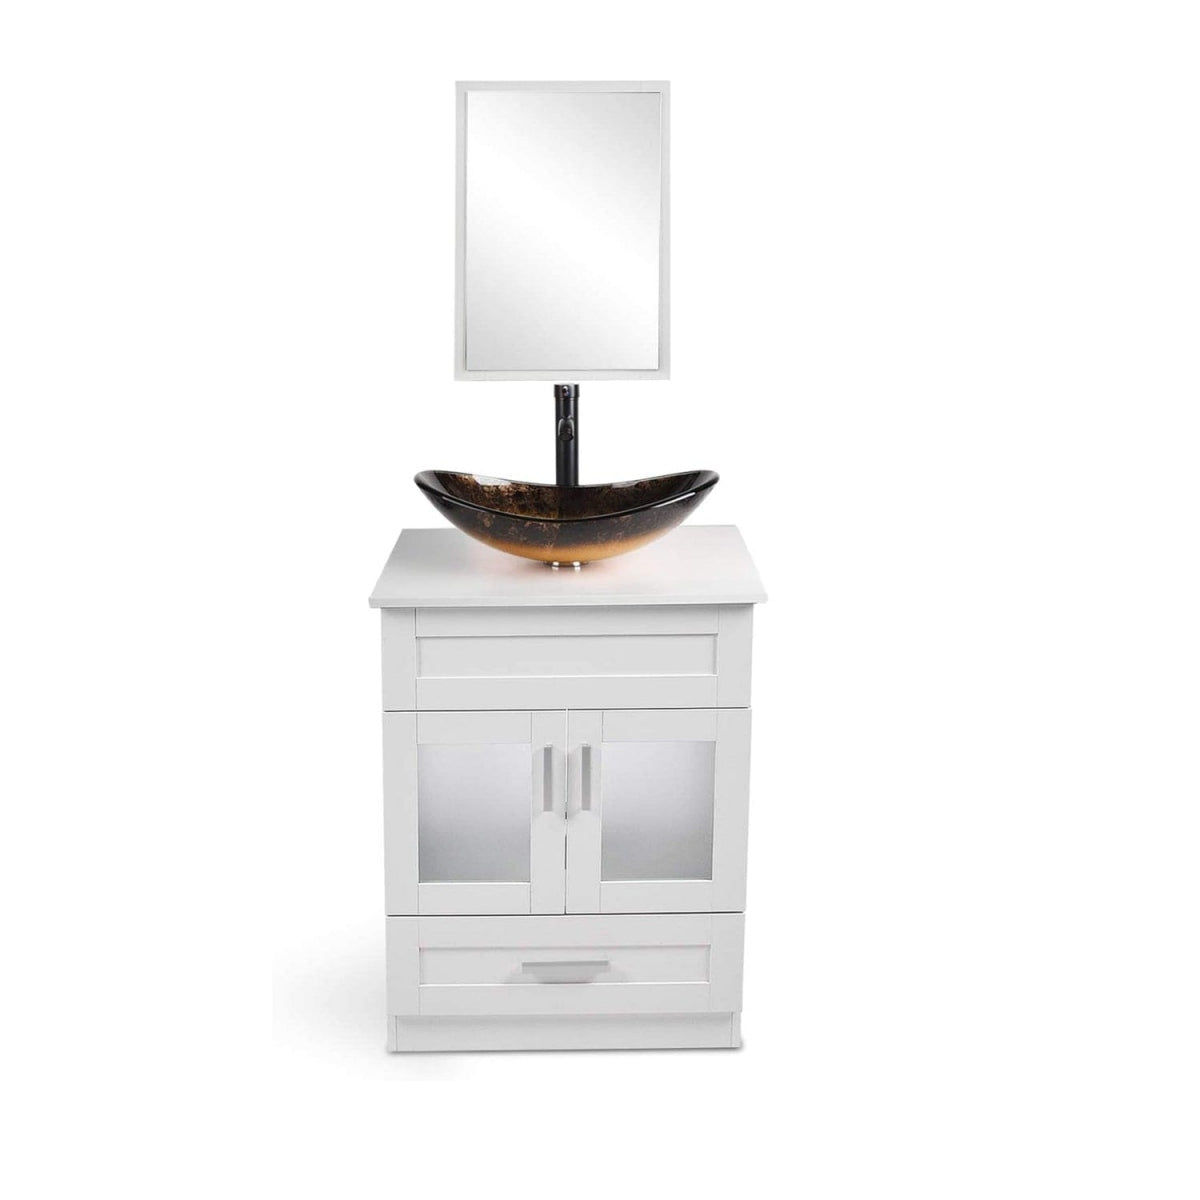 Elecwish White Bathroom Vanity with Gold Boat Sink Set BA1001-WH